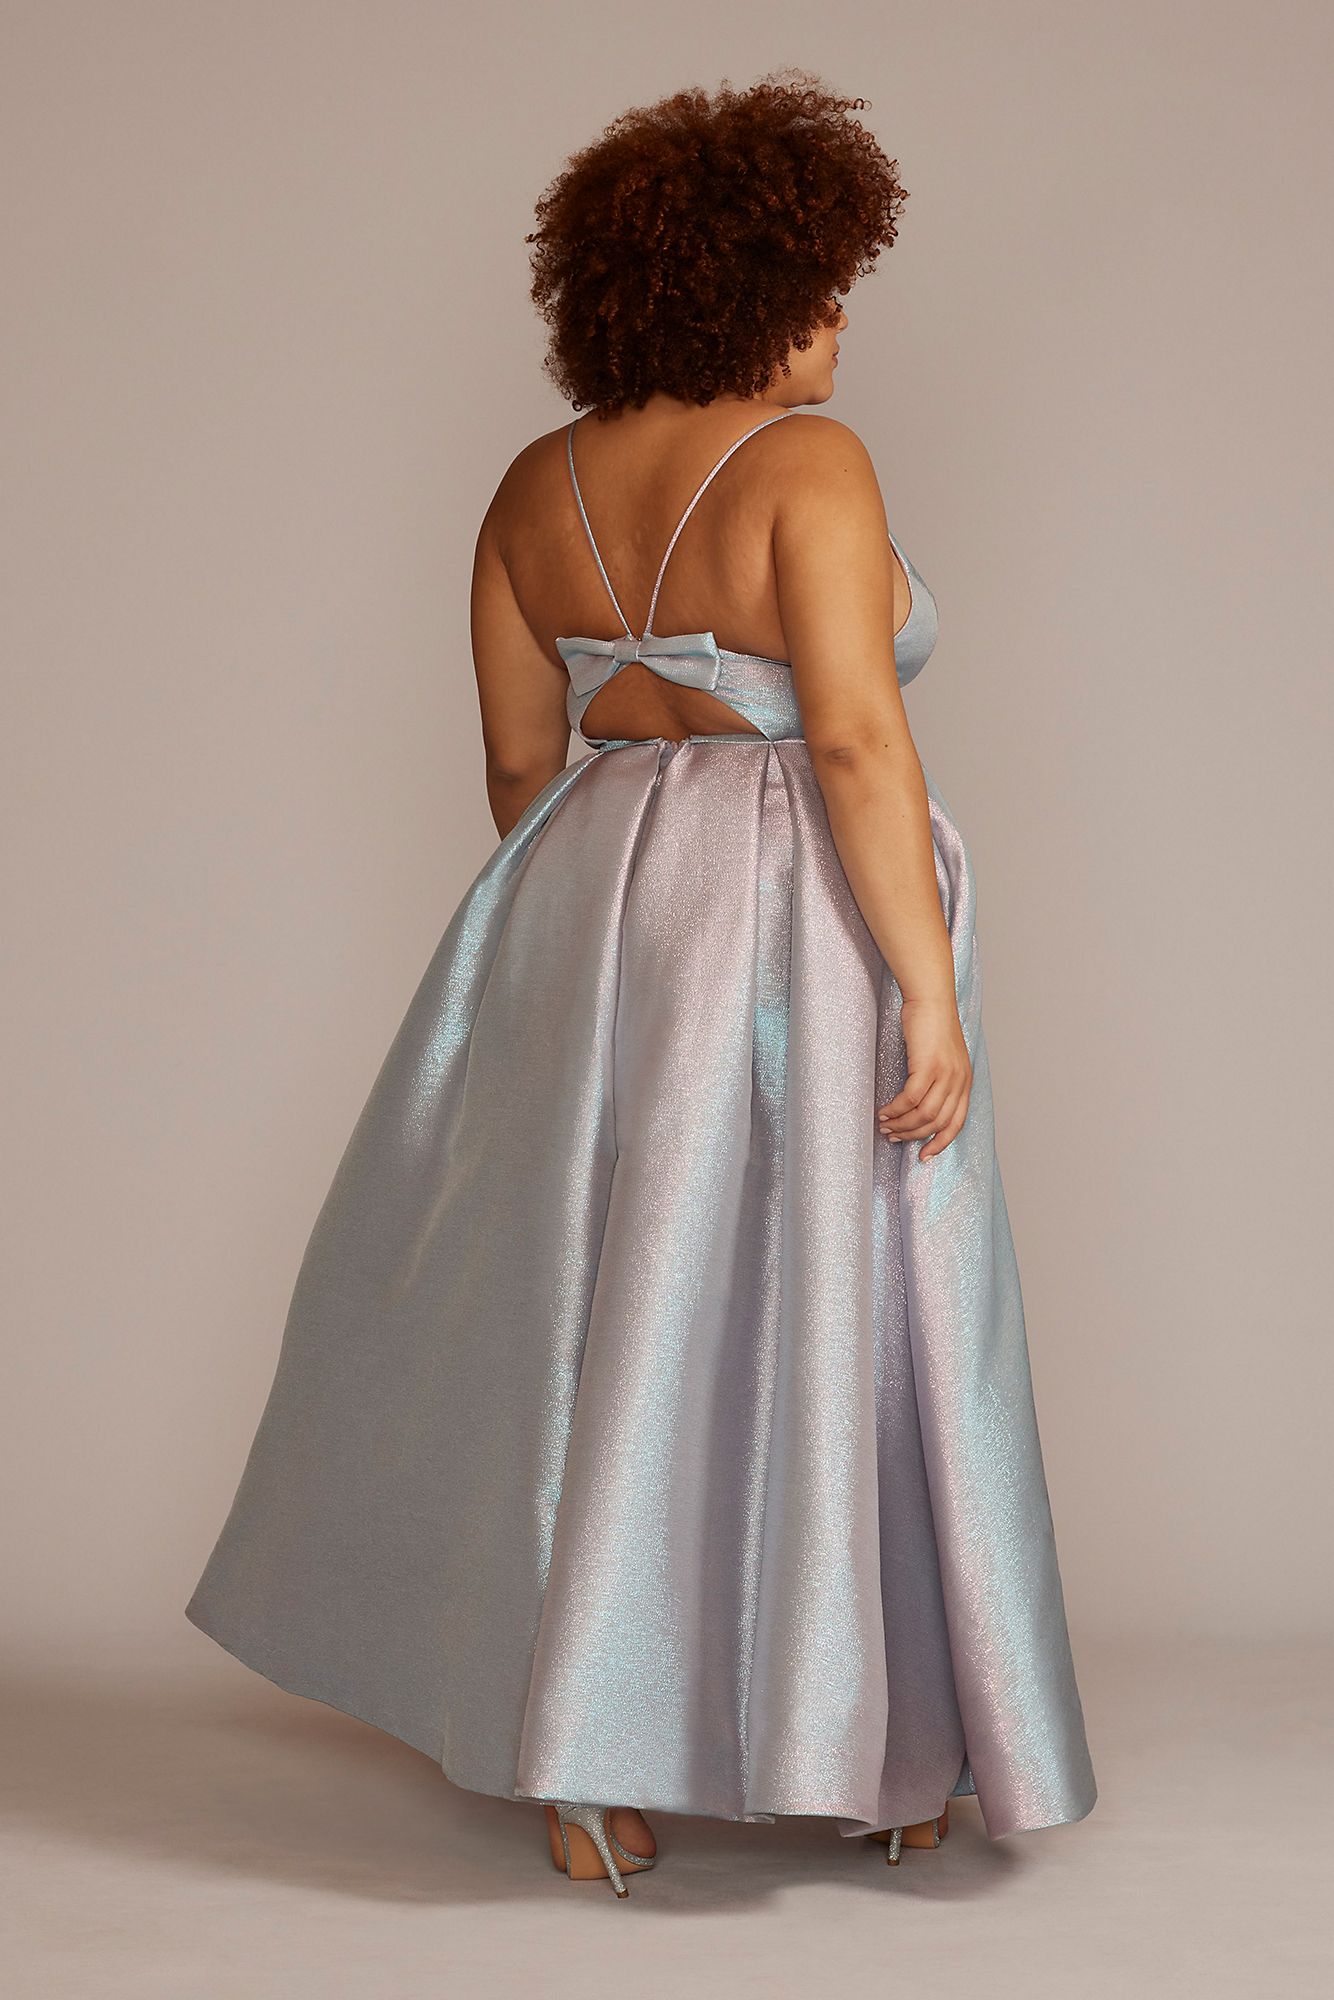 Plus Size Pleated Iridescent Ball Gown Jules and Cleo WBM2885V2W